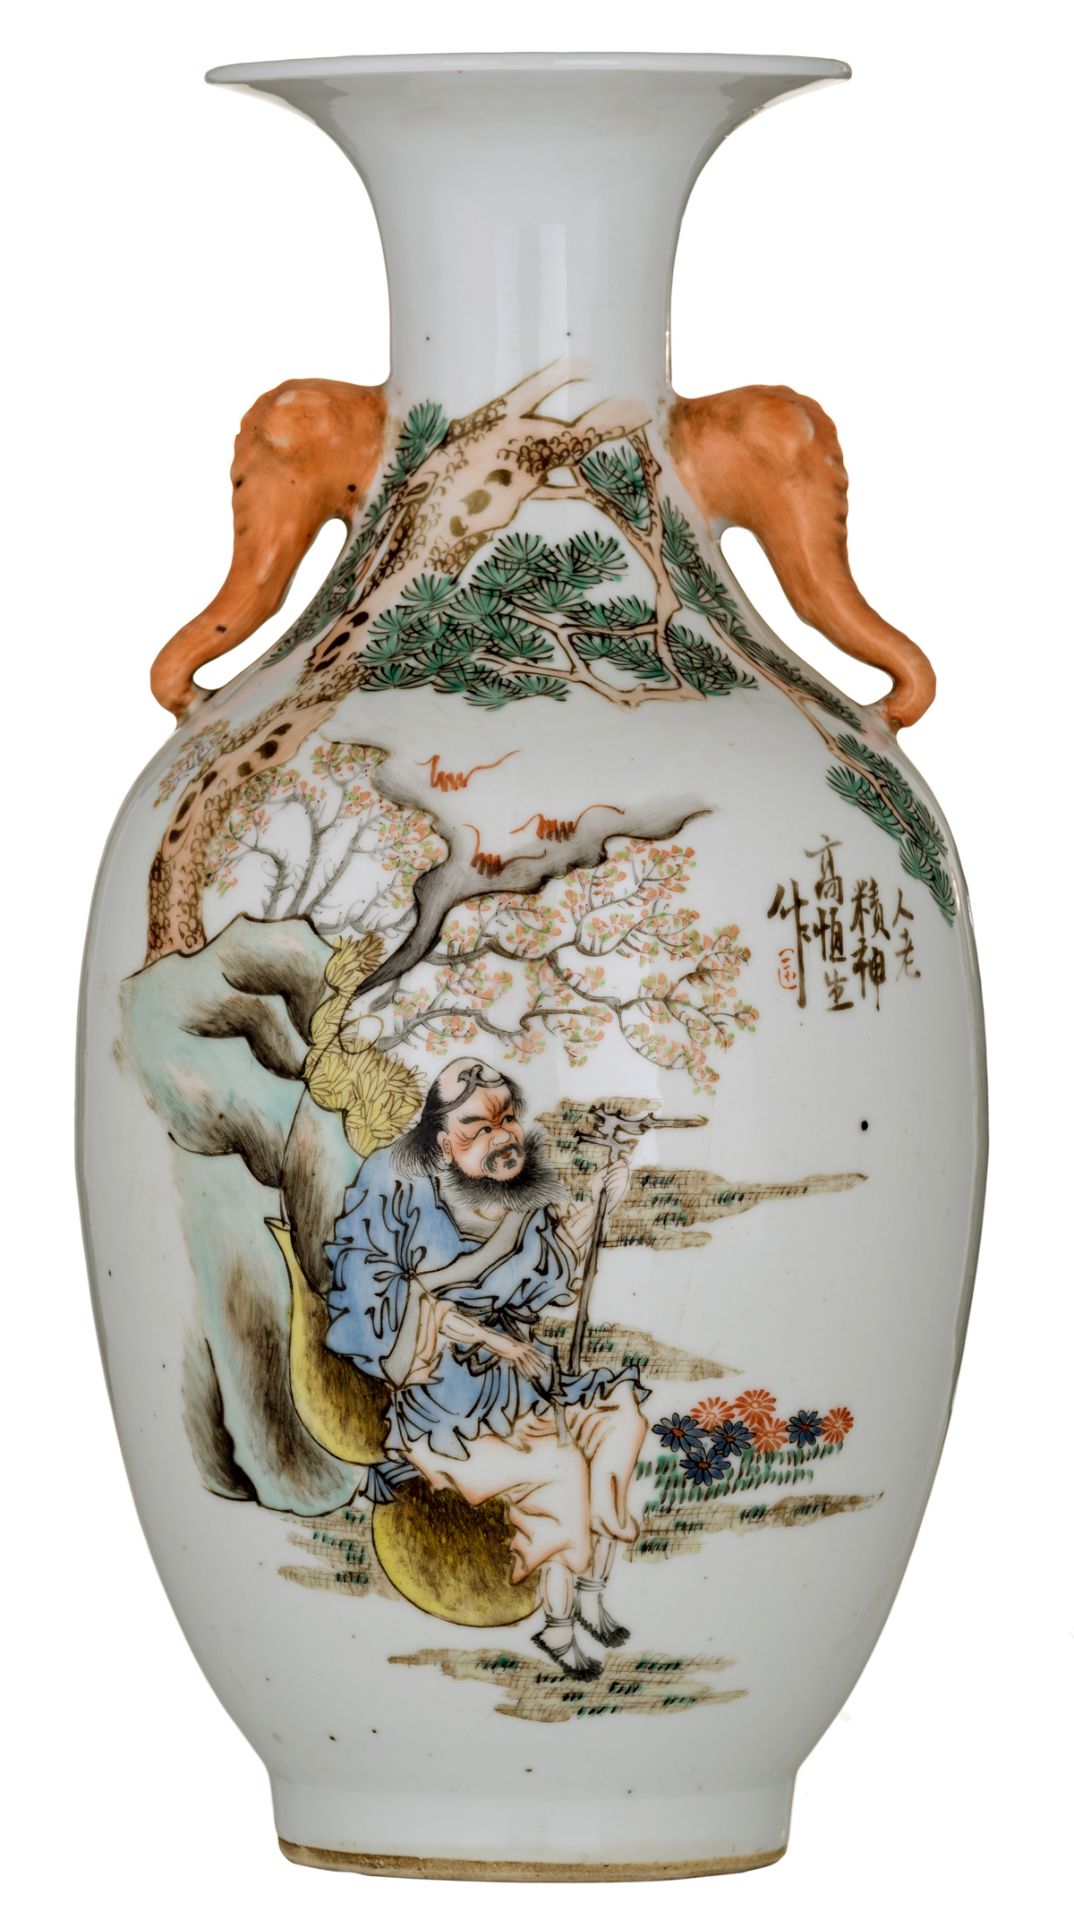 A Chinese polychrome vase, decorated with a Shou Xing figure and a calligraphic text, the handles el